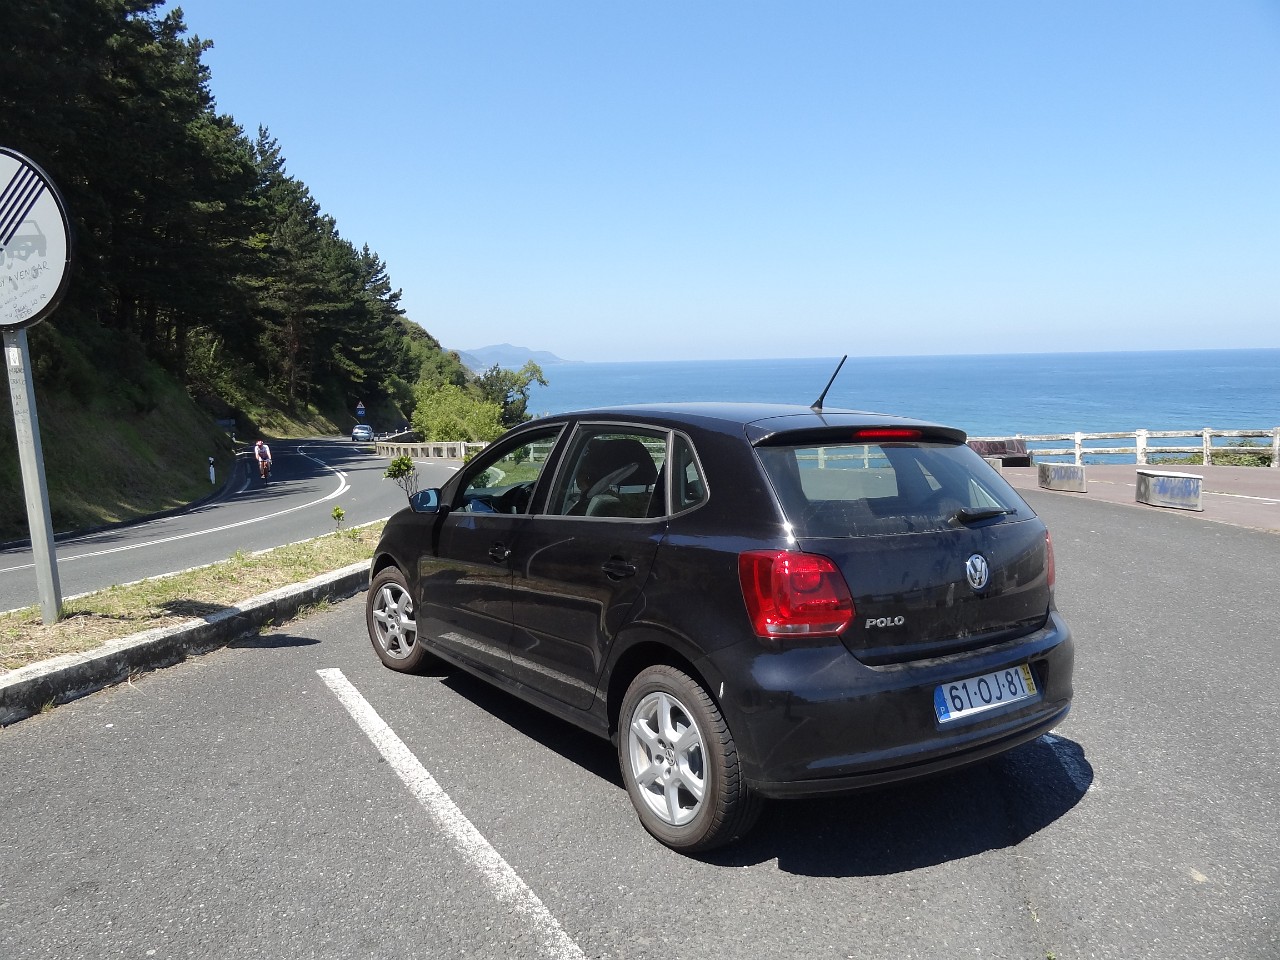 VW Polo on N-634 to Getaria